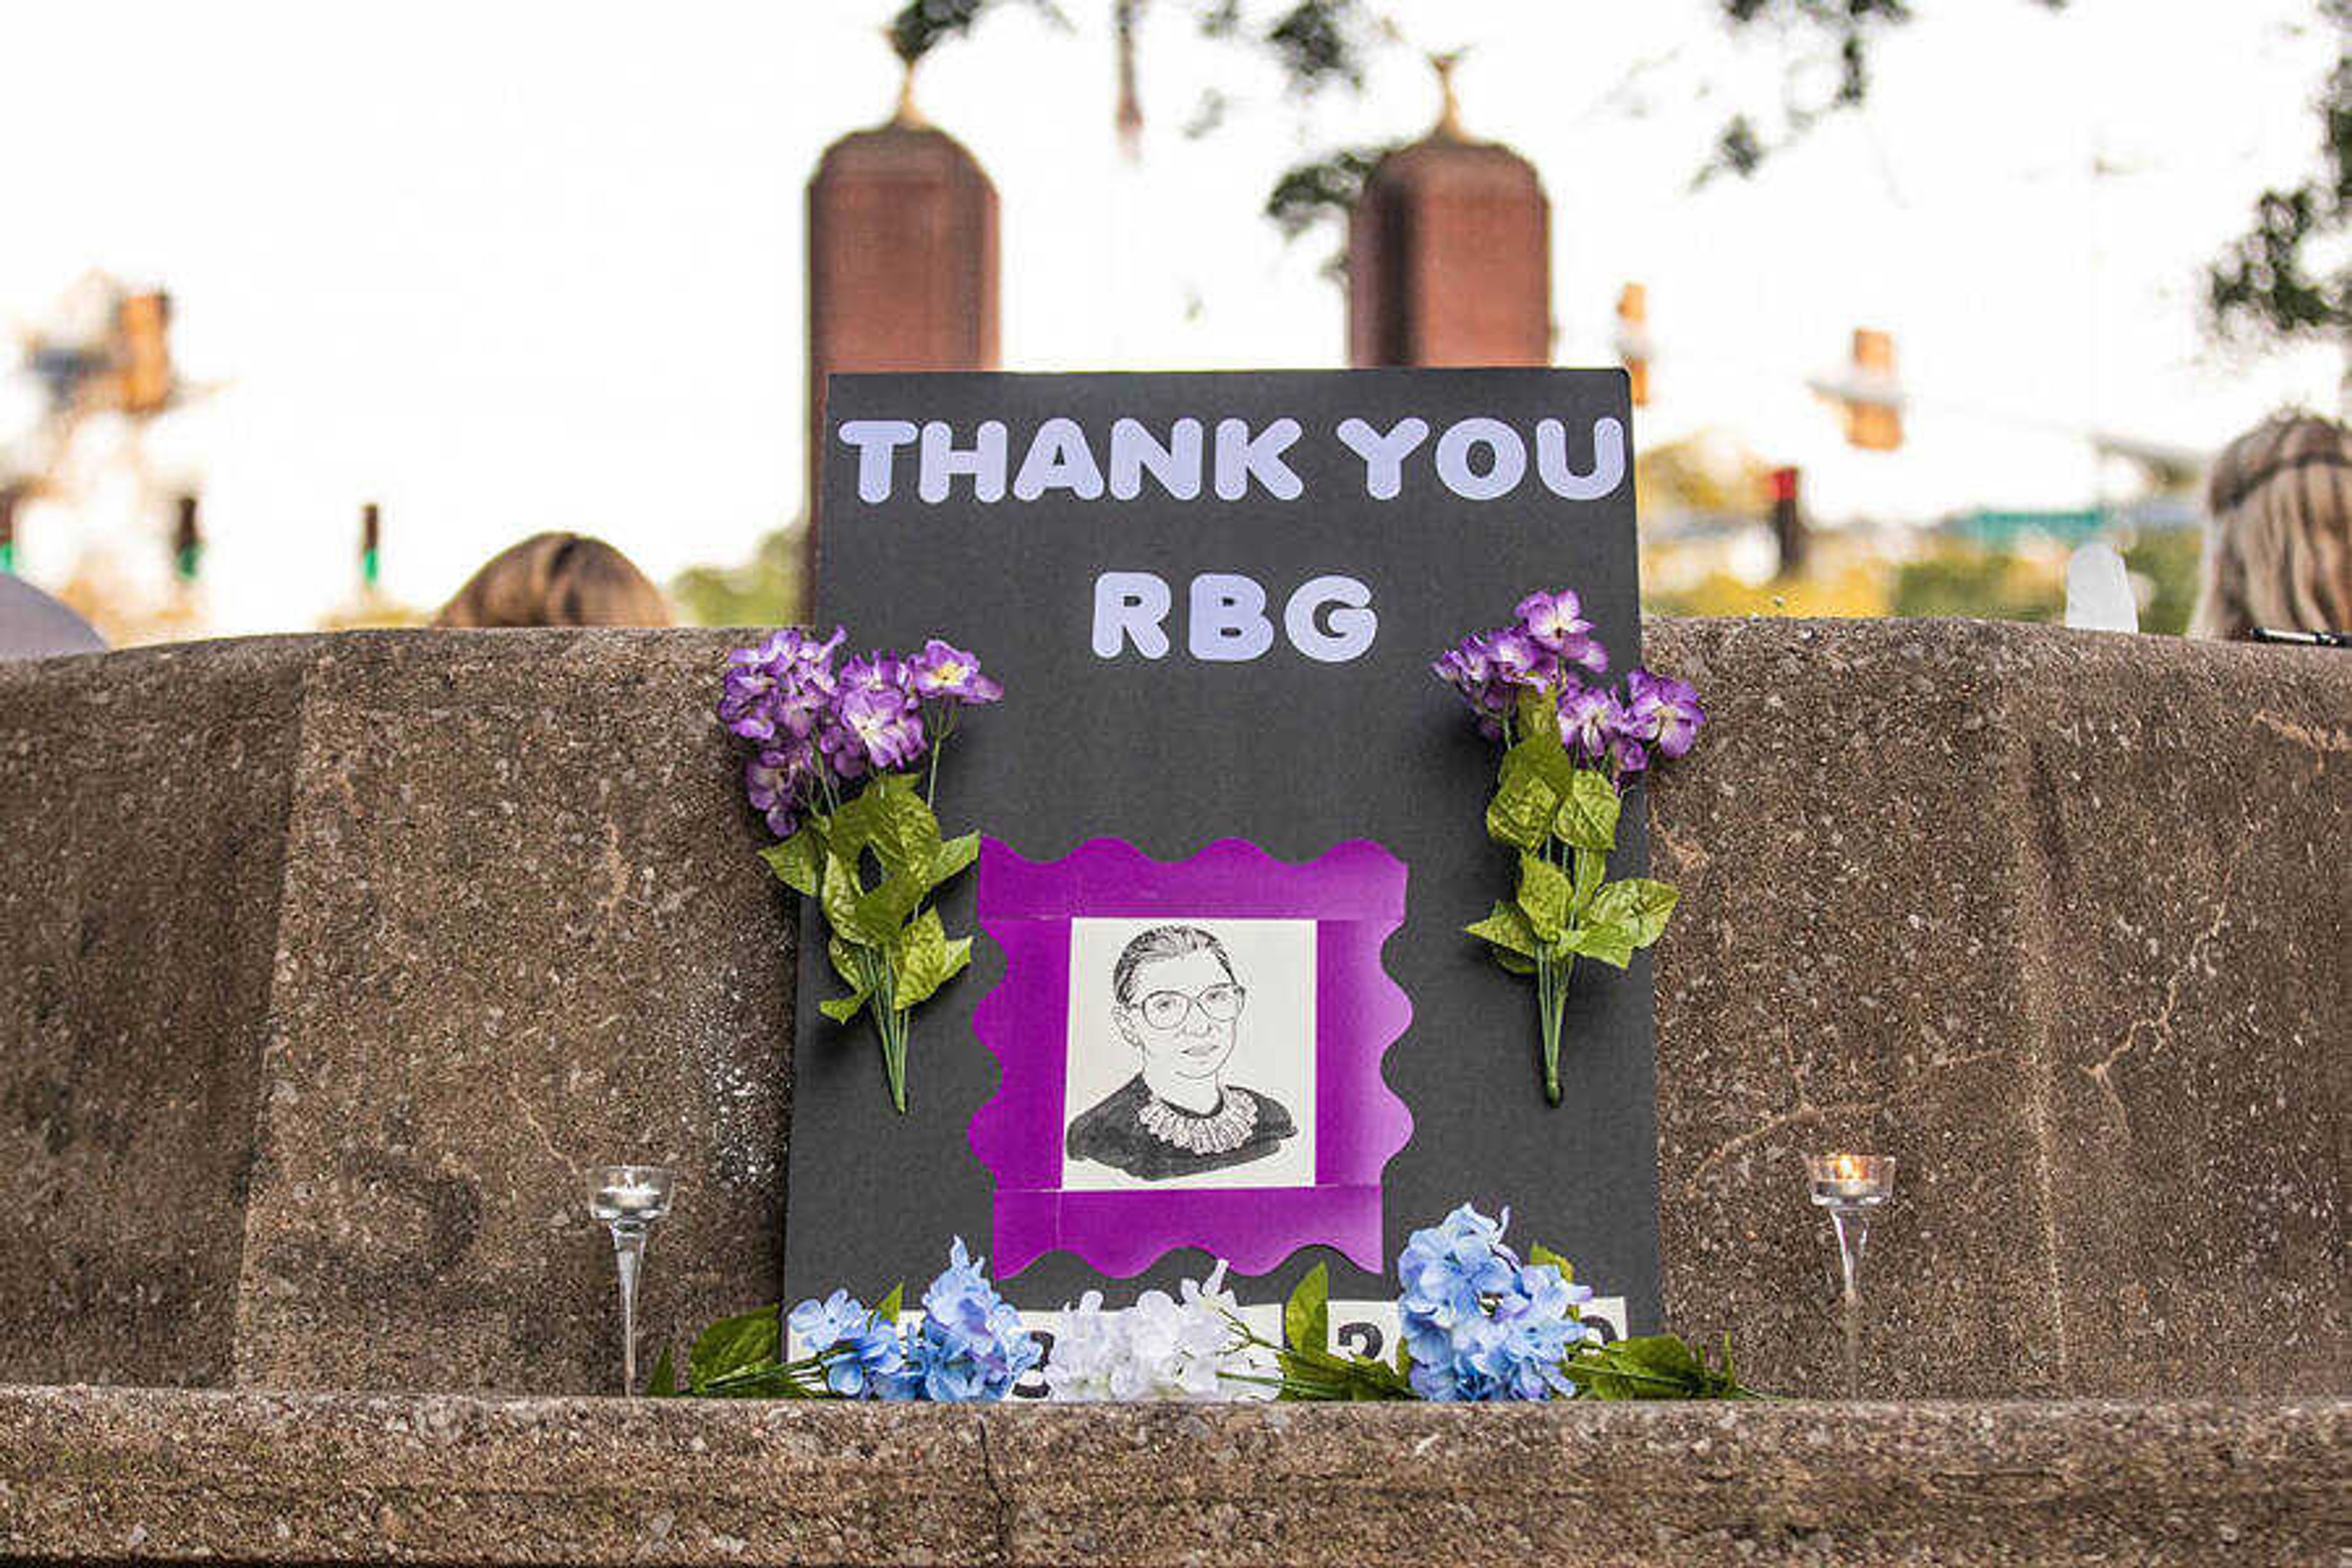 Cape Girardeau residents mourn the loss of Ruth Bader Ginsburg